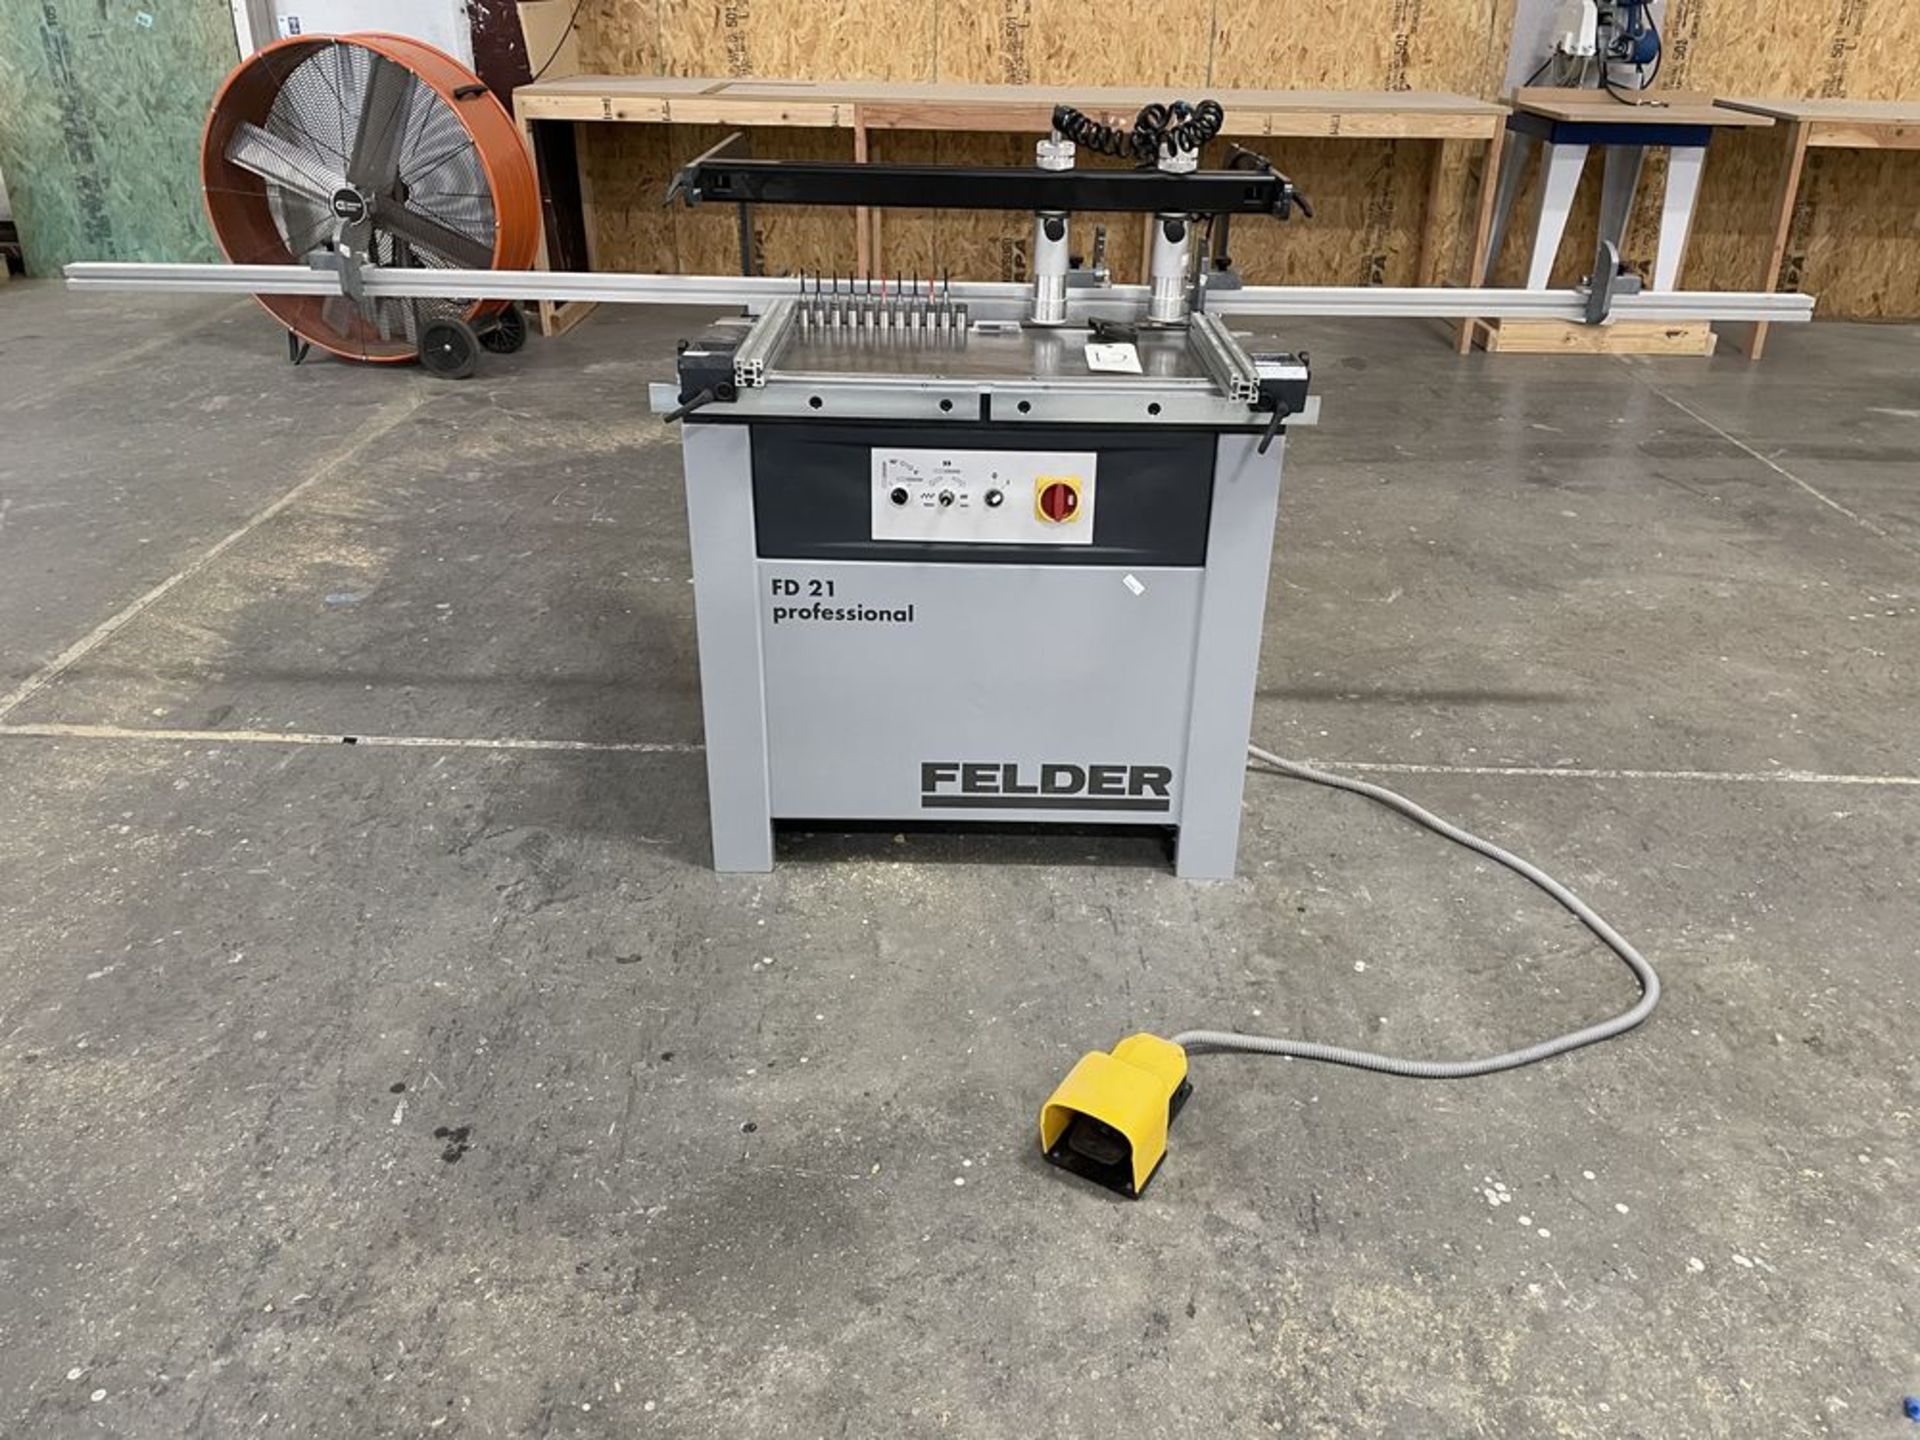 Felder FD 21 Professional Dowel Boring Machine. SN 432.08.135.18, Year 2018. Equipped with 2 420mm